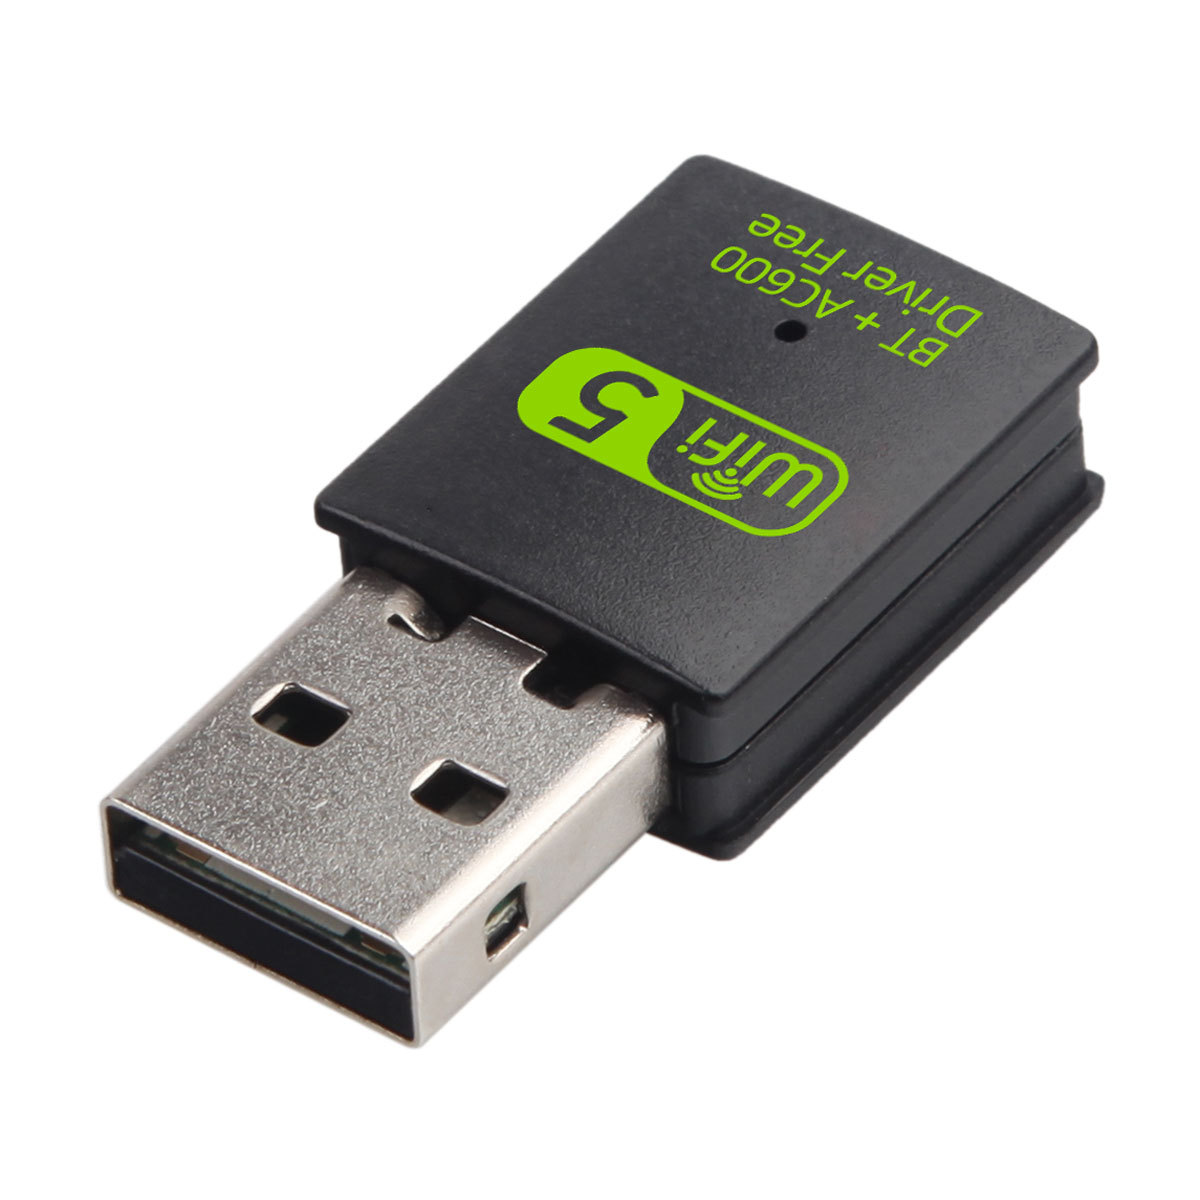 600M-Dual-Band-Driver-Free-USB20-Wireless-Networking-Adapter-WiFi-2-in-1-Wireless-Network-Card-for-D-1642007-5